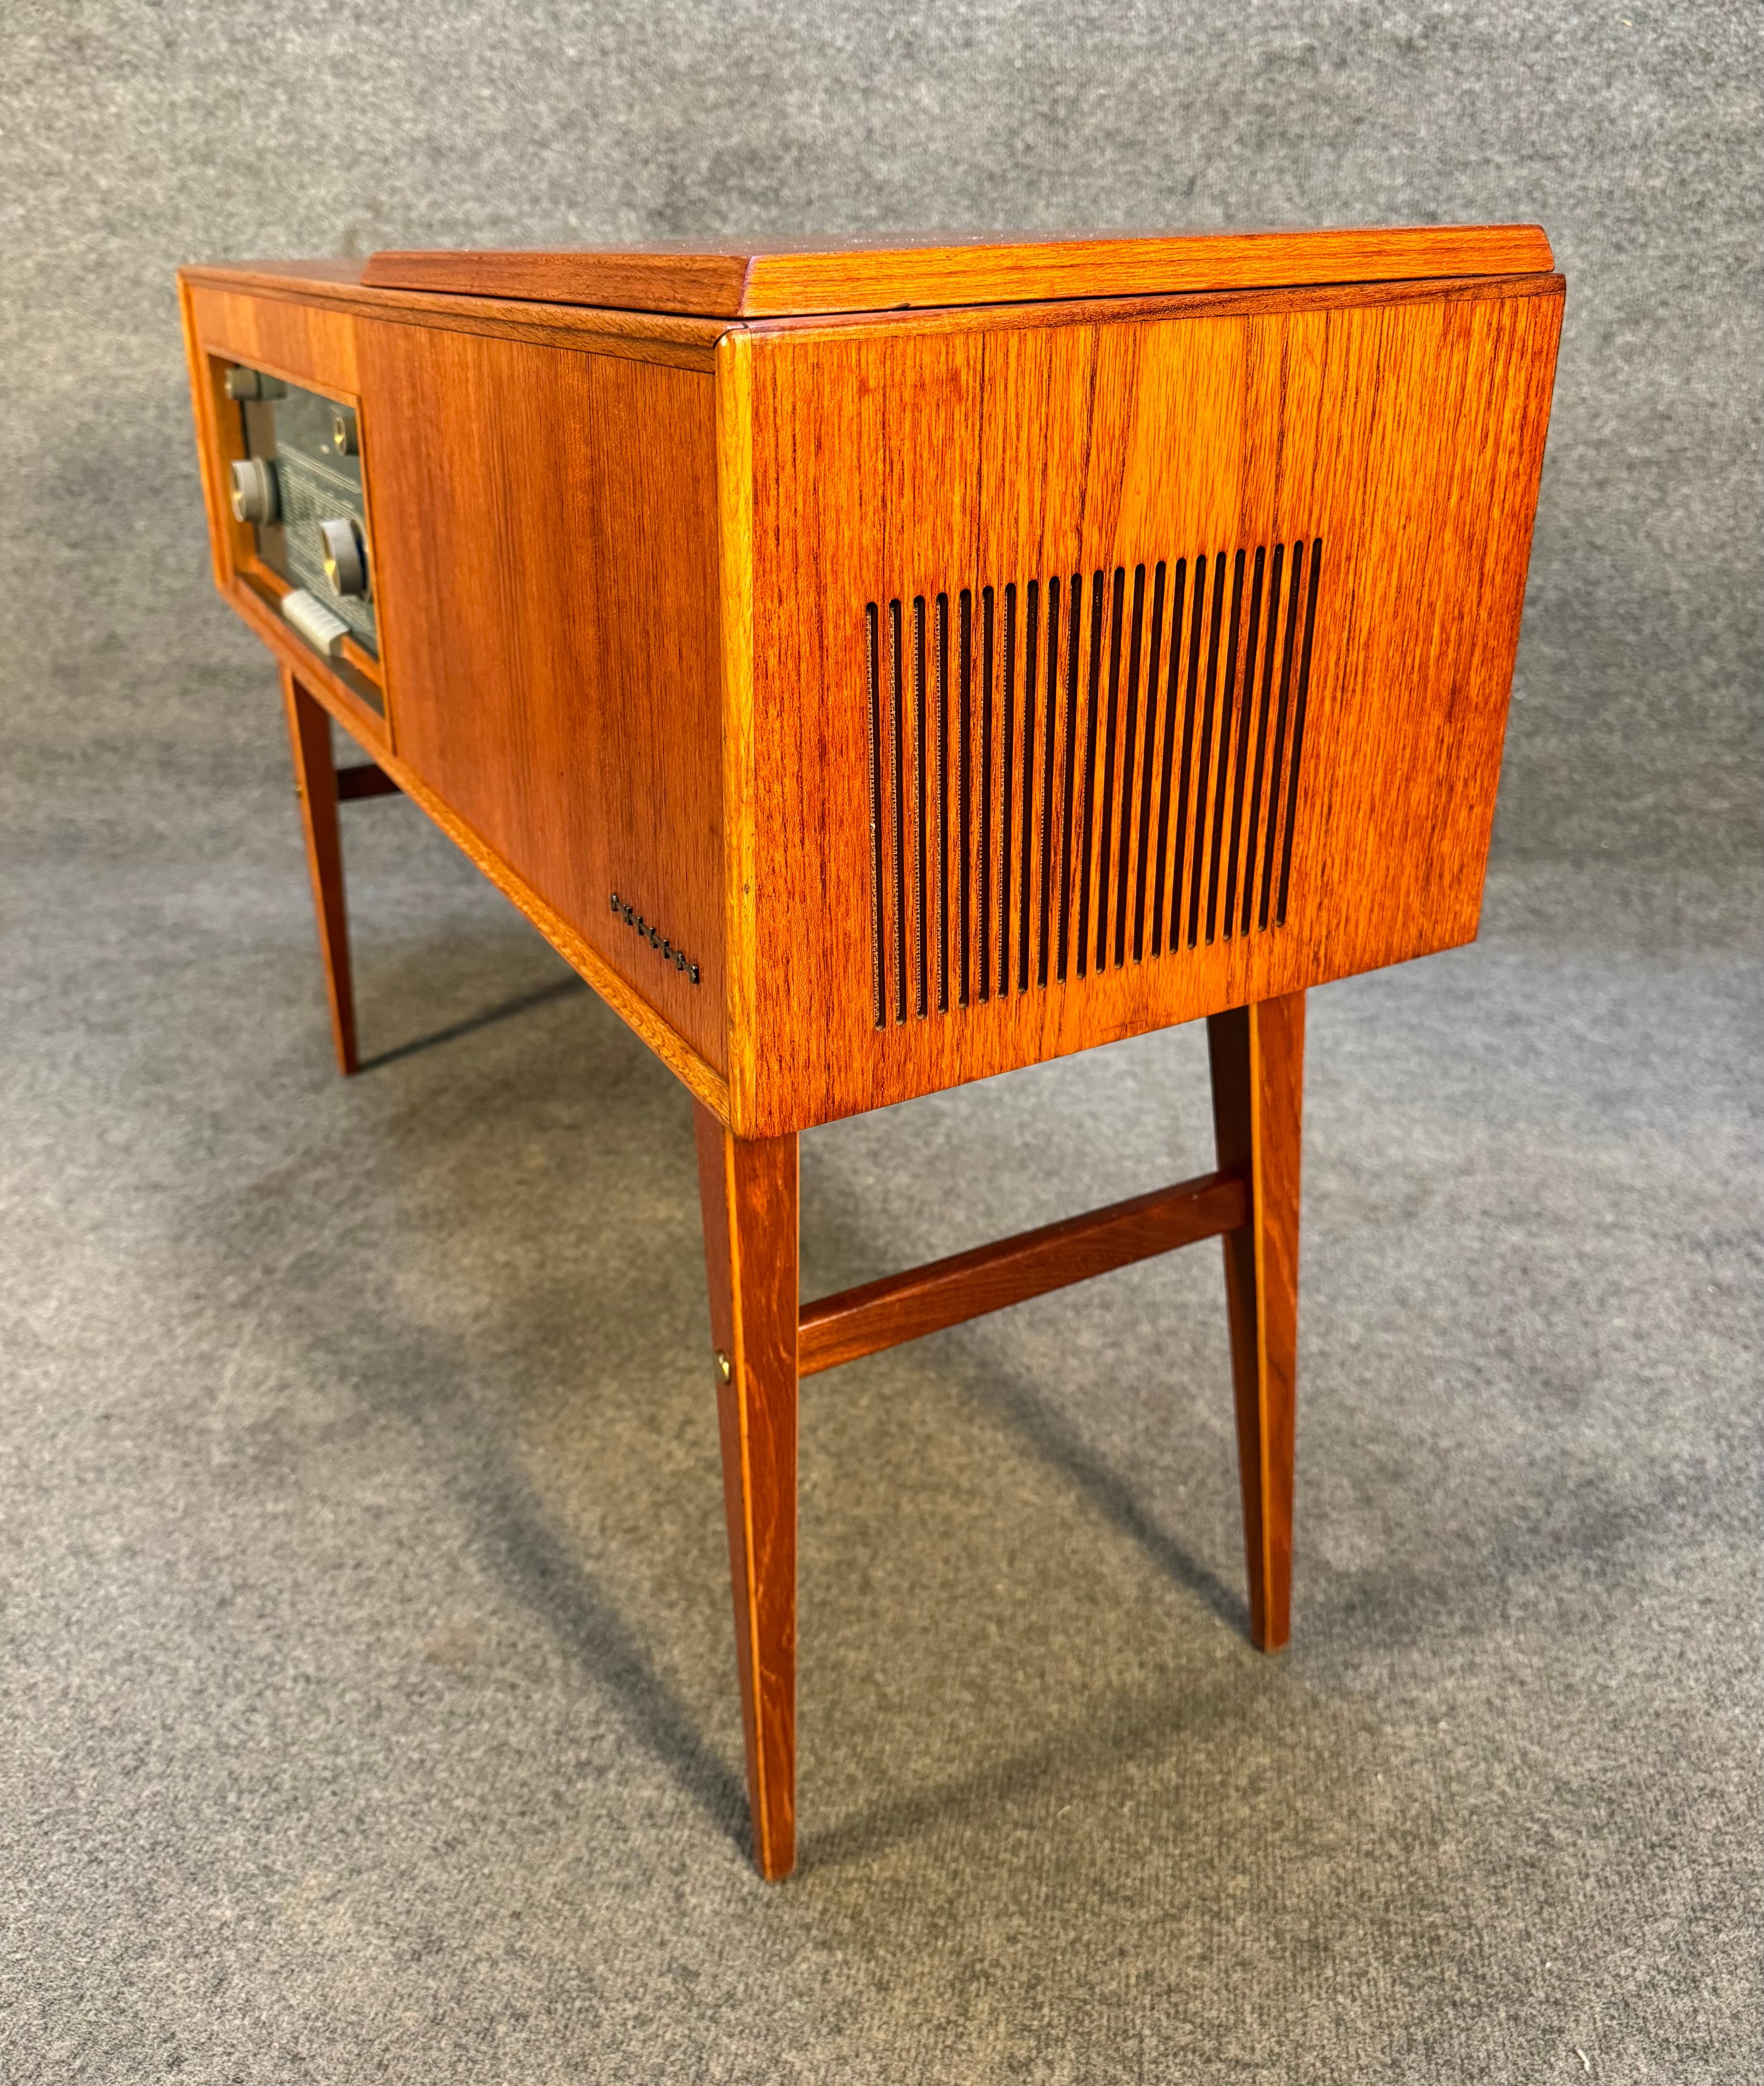 Vintage Scandinavian Mid Century Teak Stereo Console by Phillips In Good Condition For Sale In San Marcos, CA